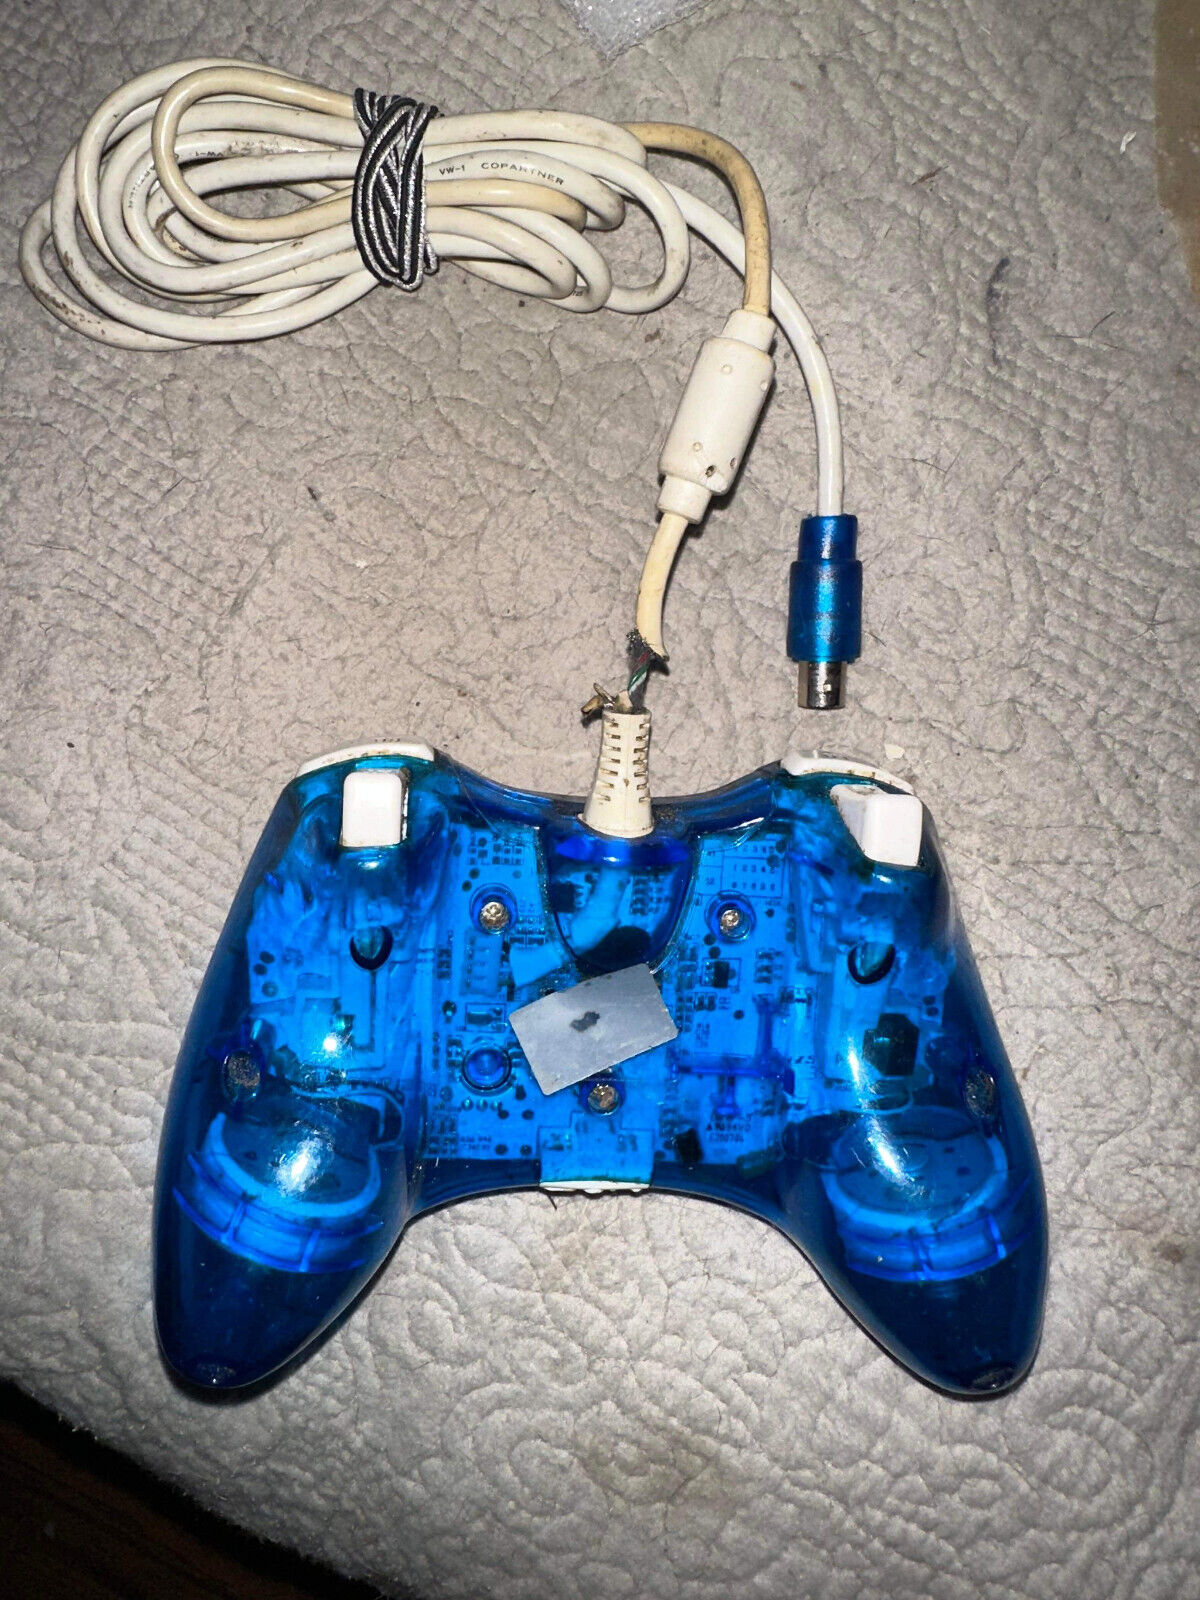 Rock Candy Wired Controller for Xbox 360 Blue w/7 foot cord